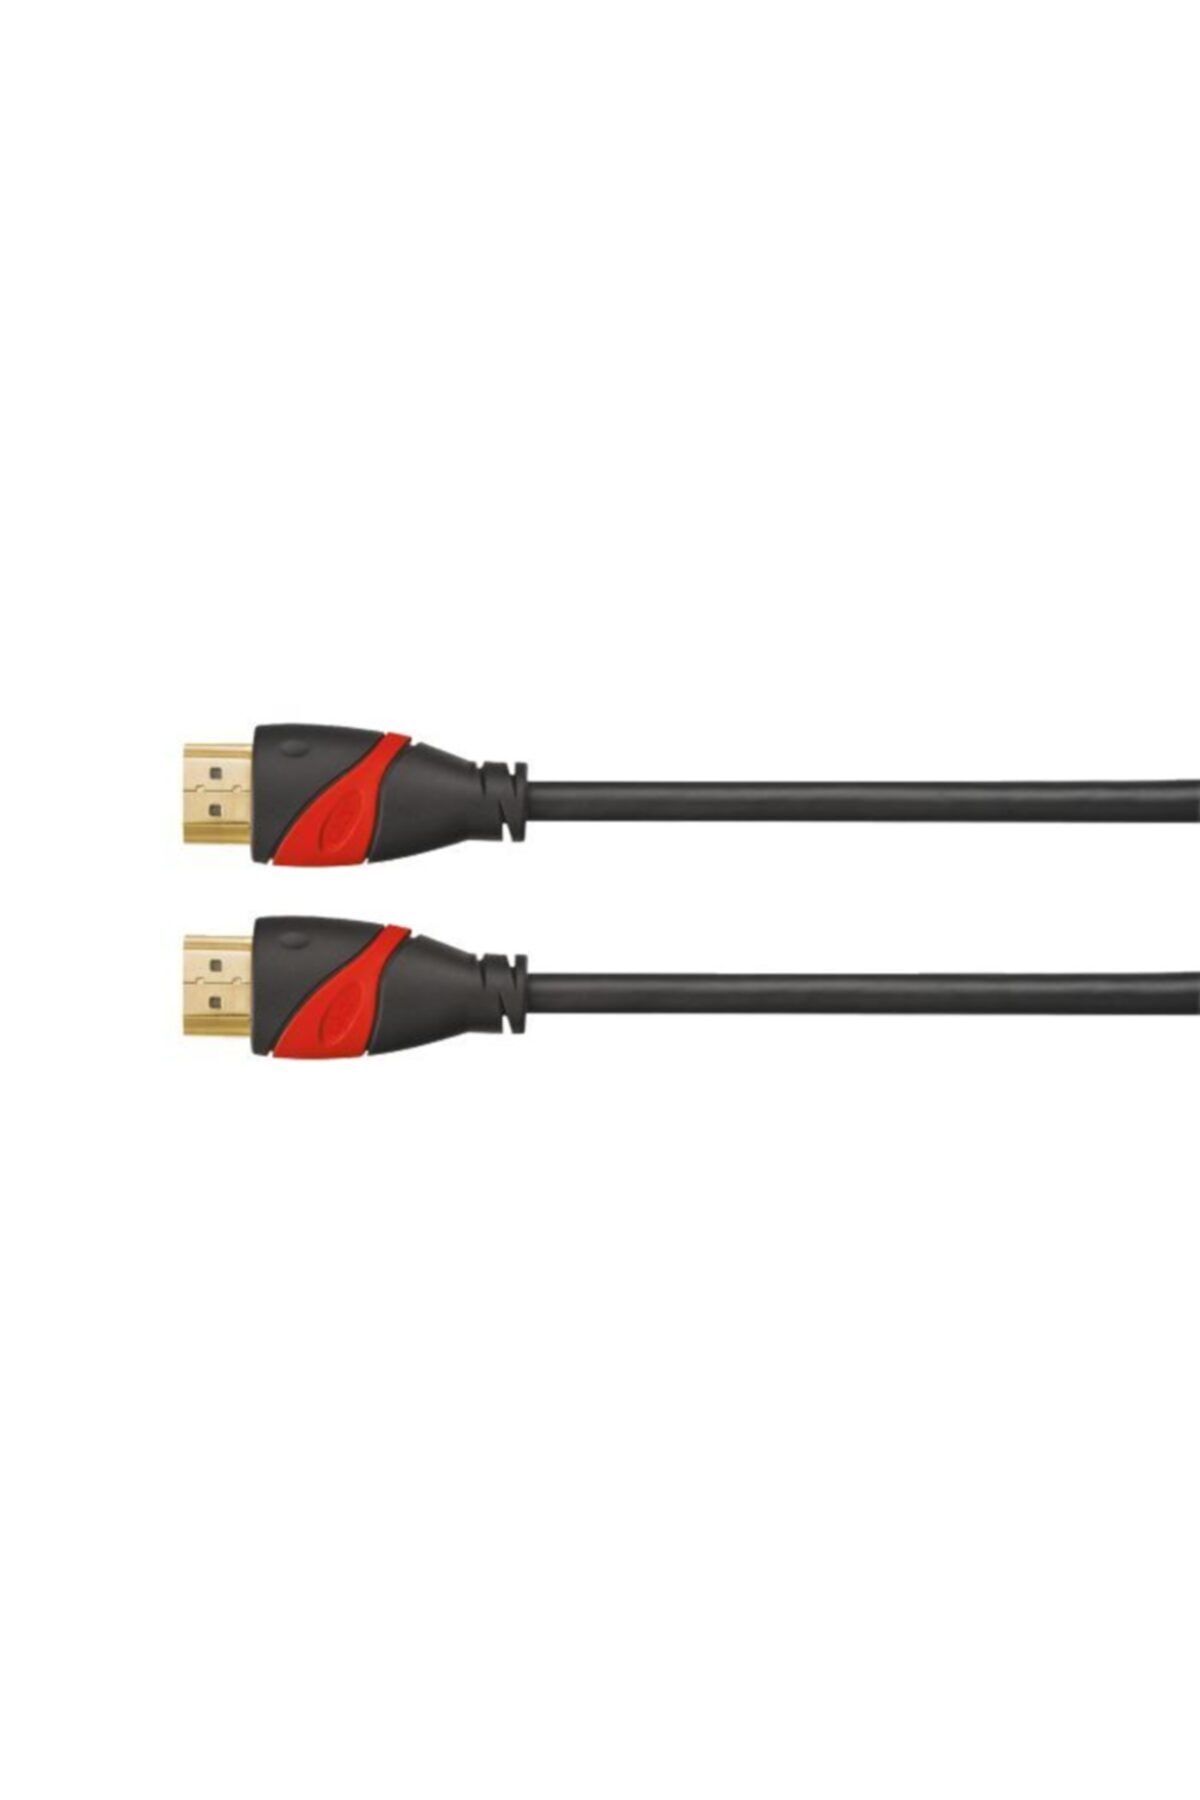 Trust 21082 Gxt 730 Hdmı Cable For Plays